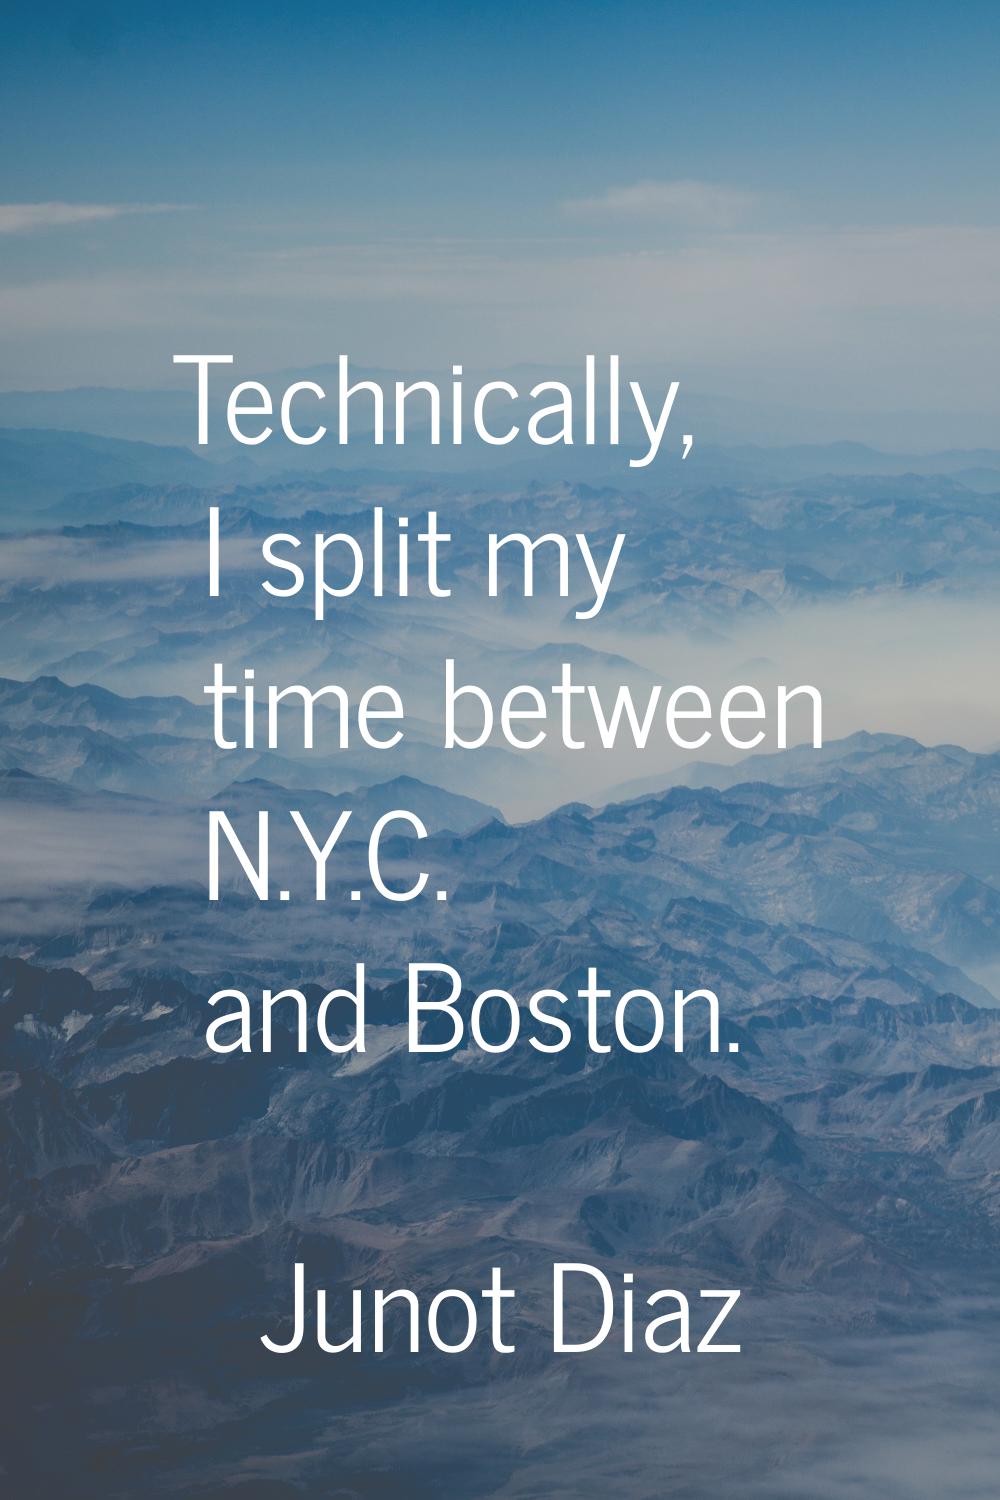 Technically, I split my time between N.Y.C. and Boston.